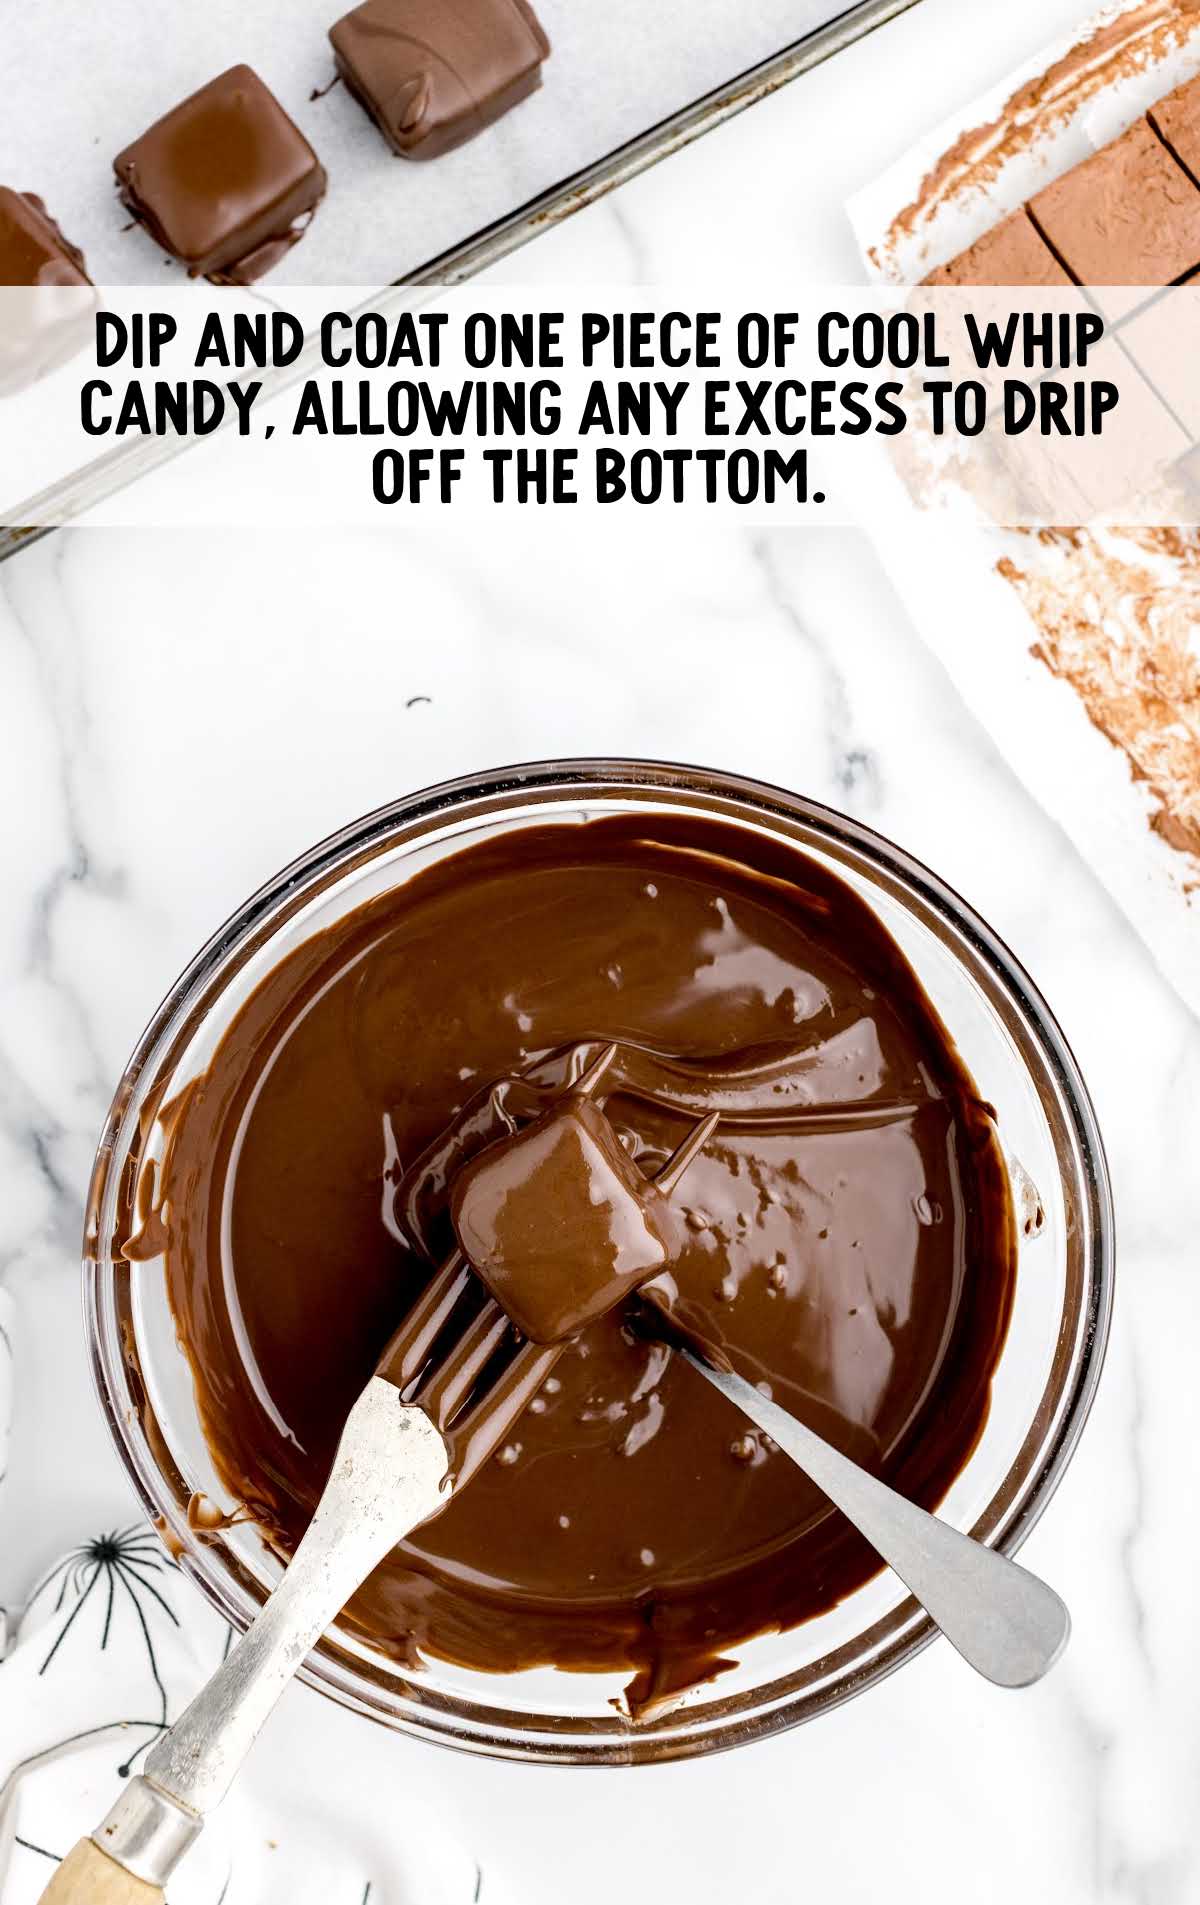 cool whip candy dipped in a bowl of melted chocolate